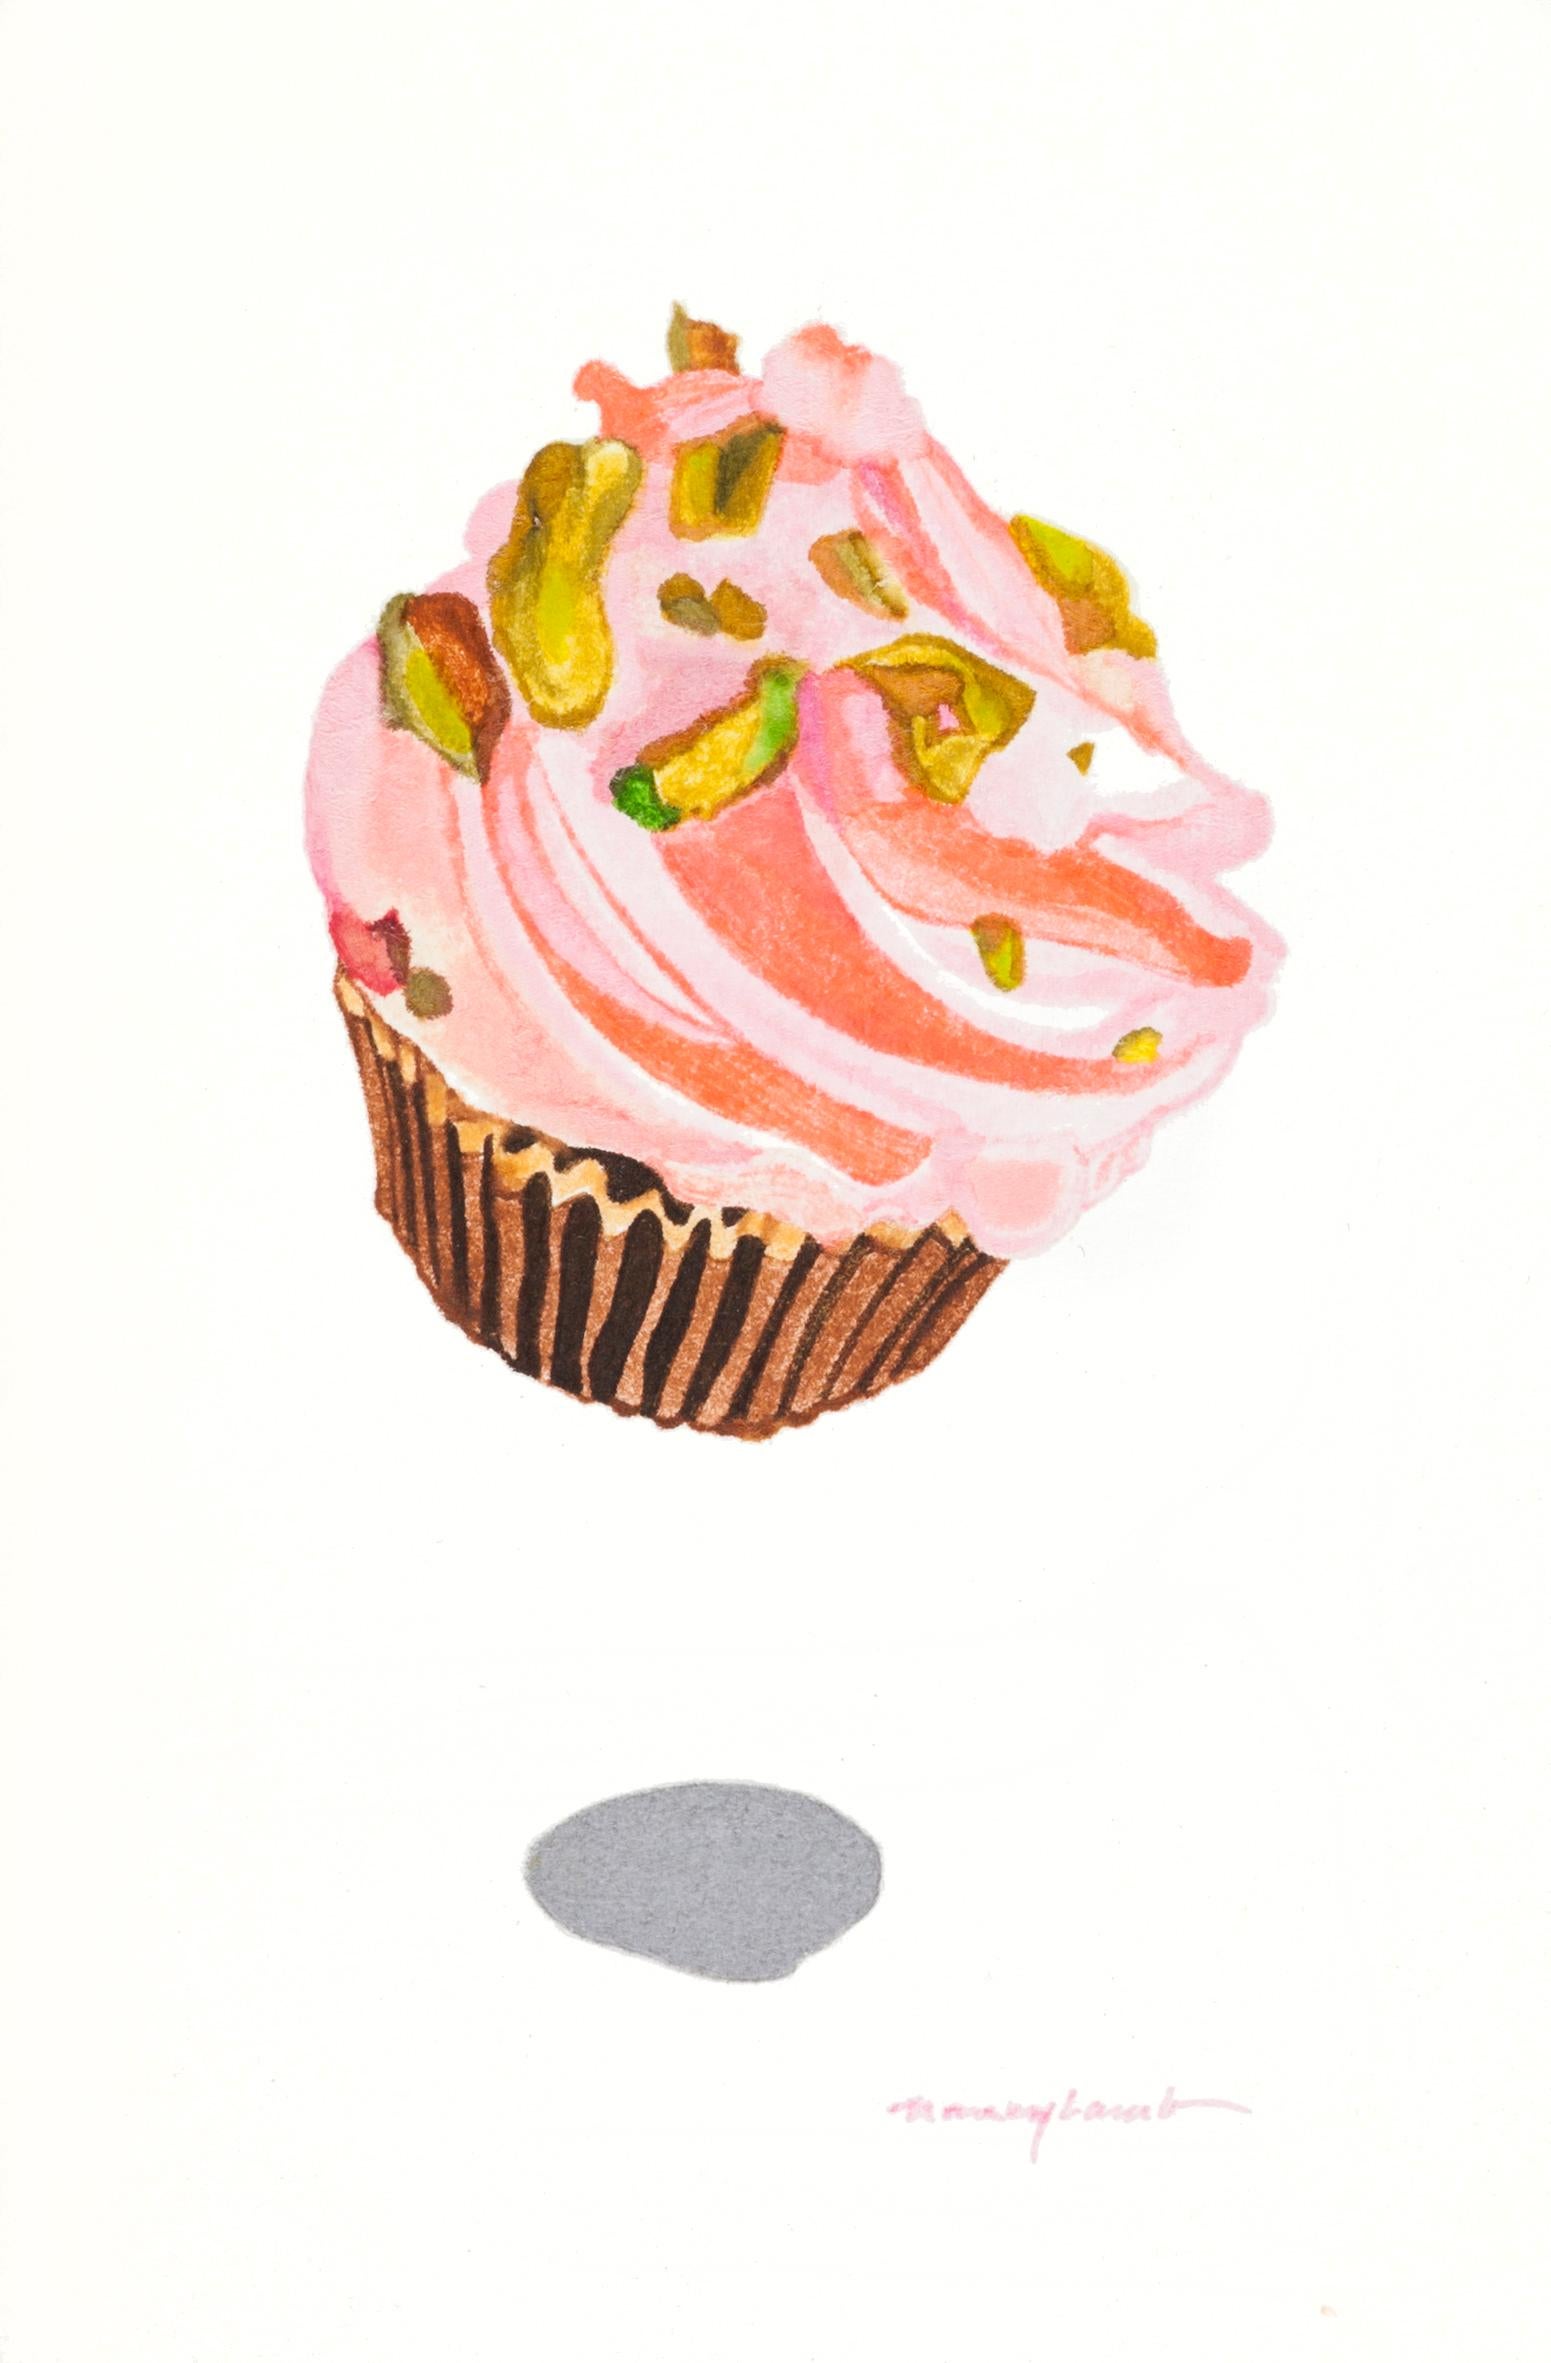 Small Contemporary Dessert Watercolor of Pink Strawberry Cupcake with Pistachios